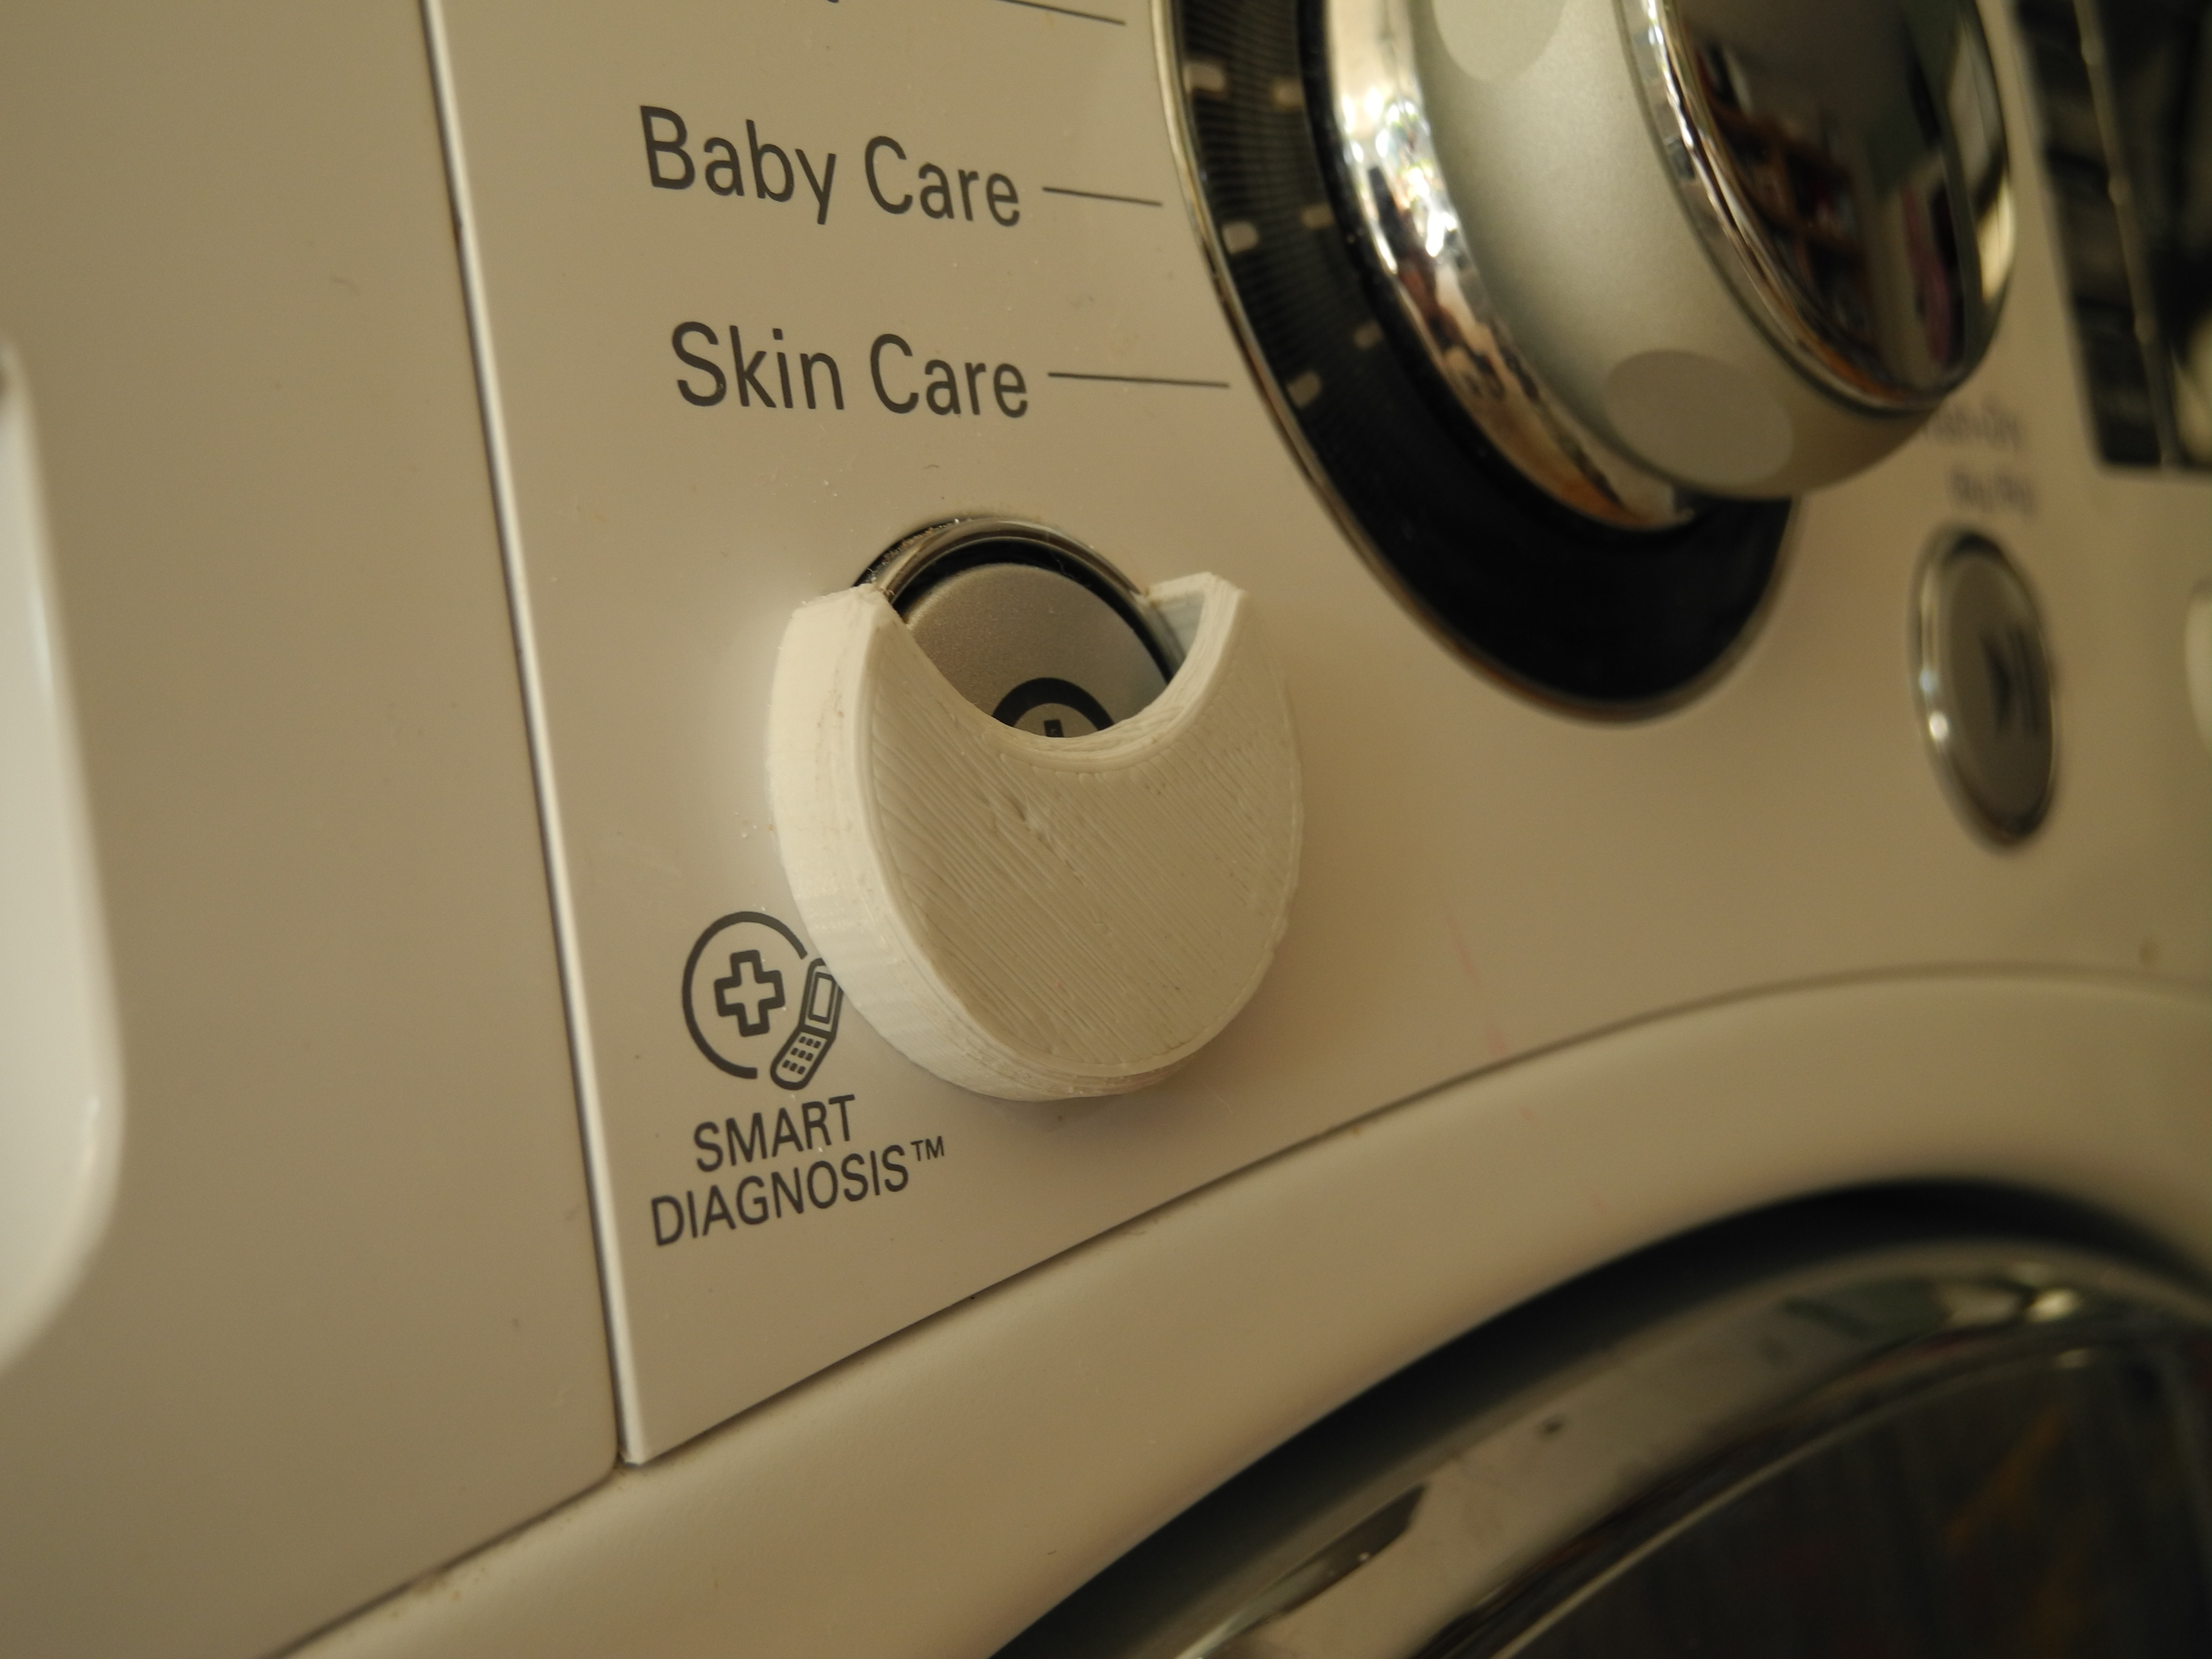 Power Button Cover for LG Washing Machines